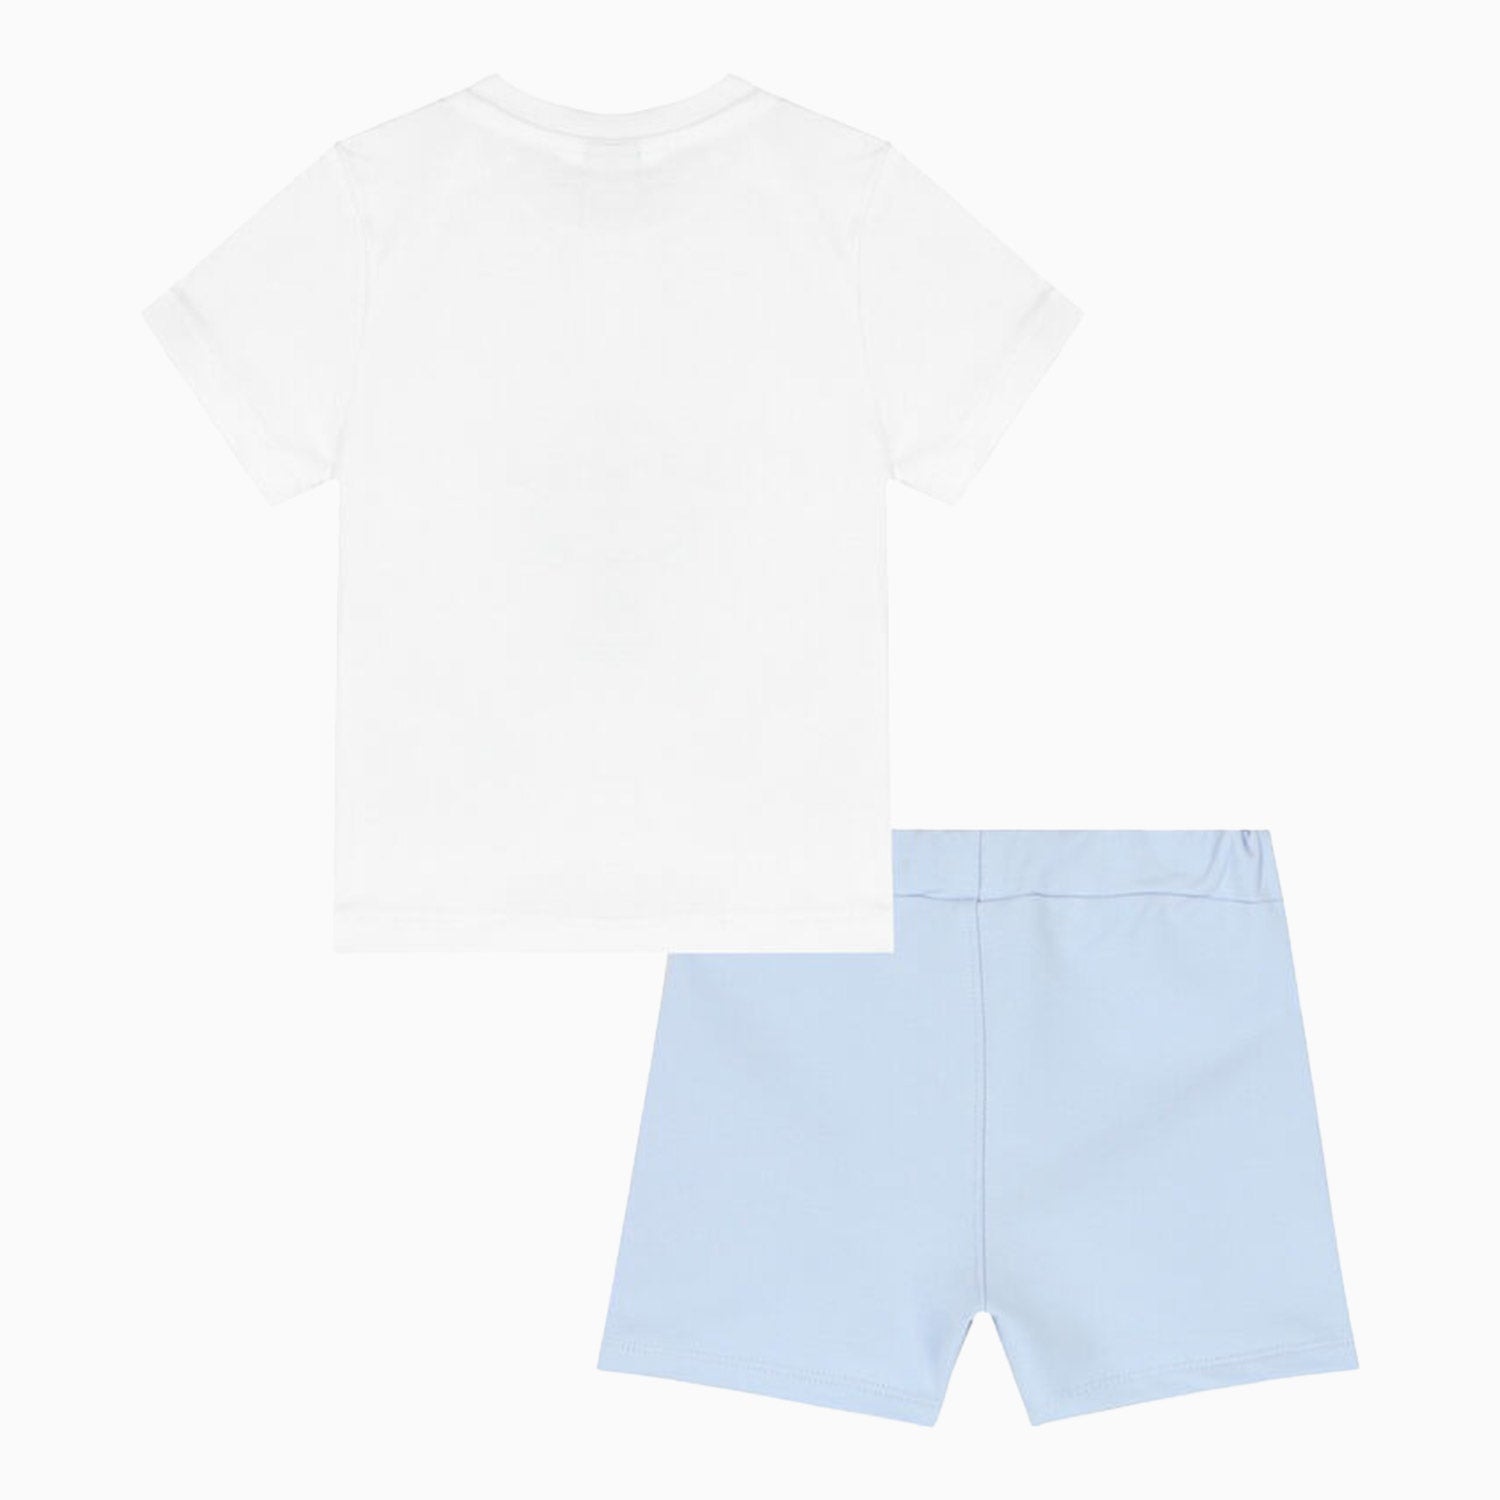 Hugo Boss Kid's T Shirt And Shorts Outfit Toddlers - Color: White, Pale Blue - Kids Premium Clothing -